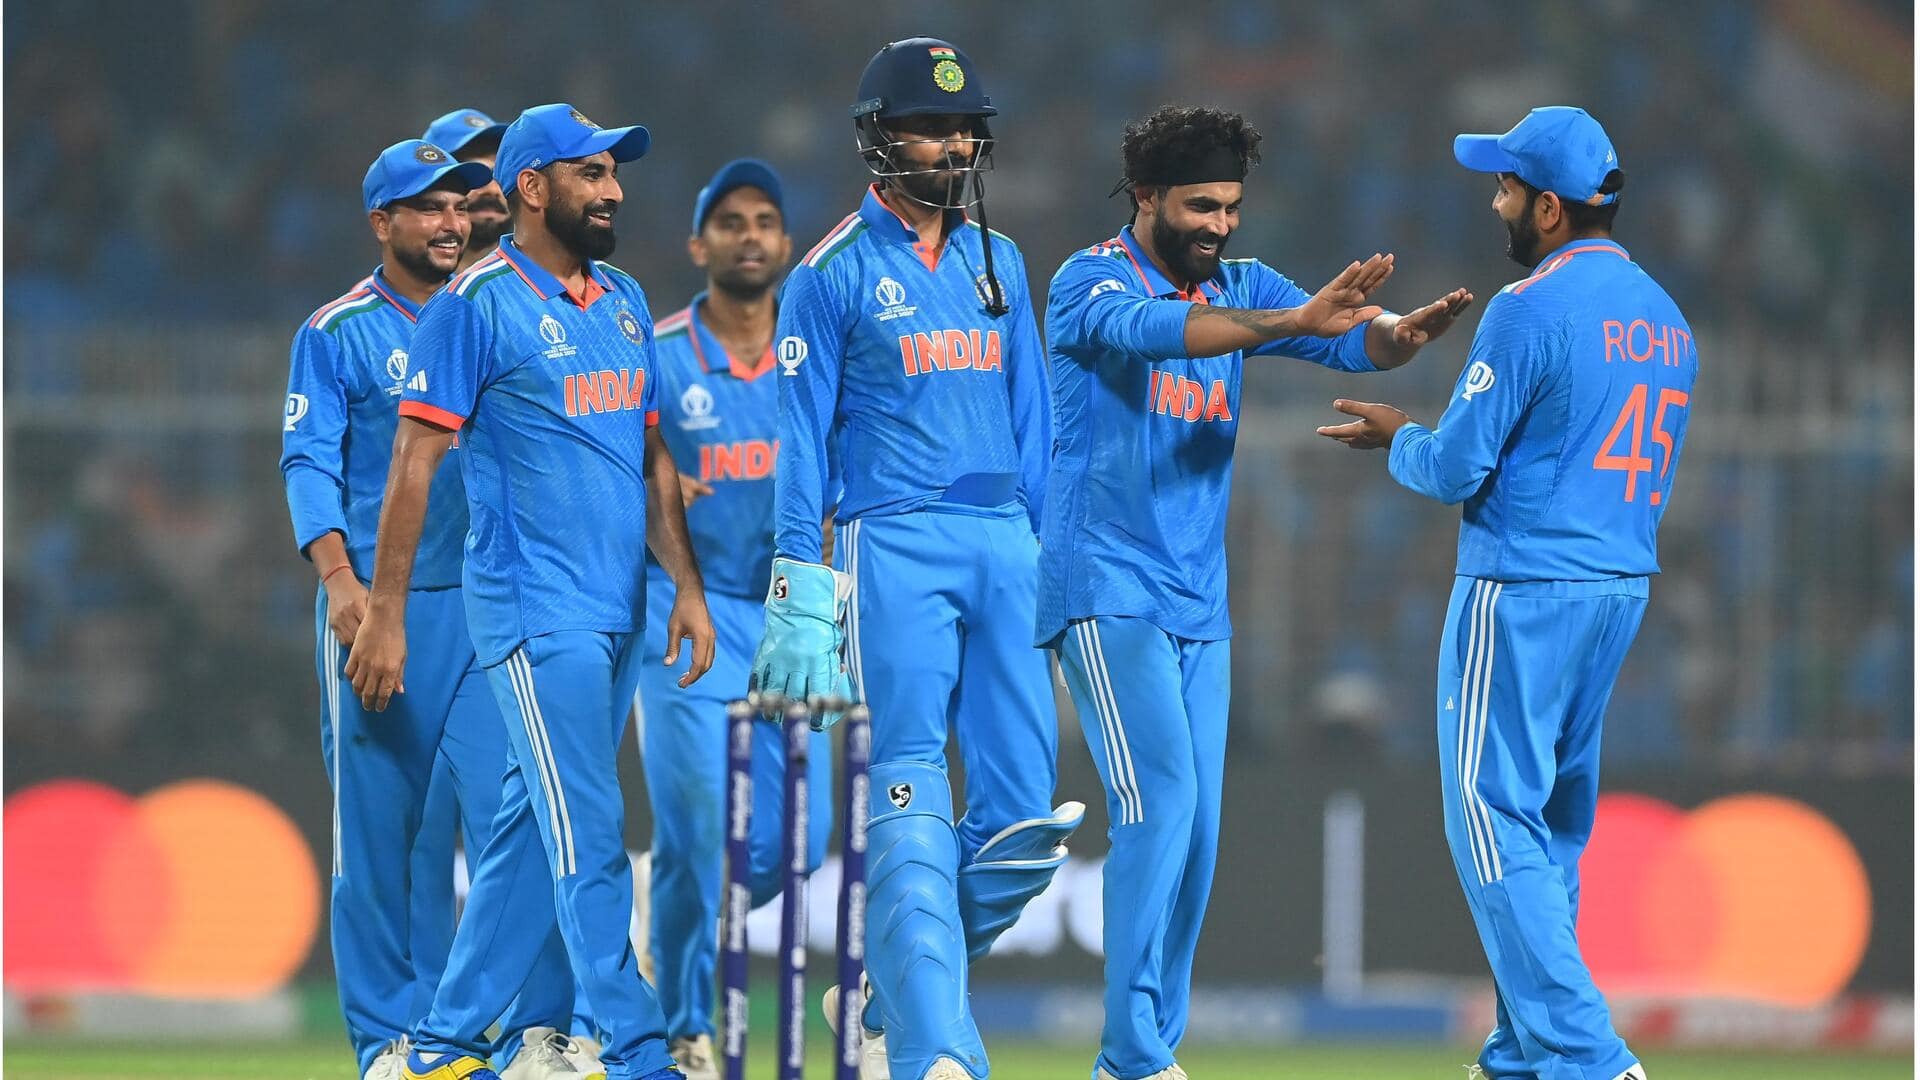 Decoding India's biggest wins in ICC Cricket World Cup